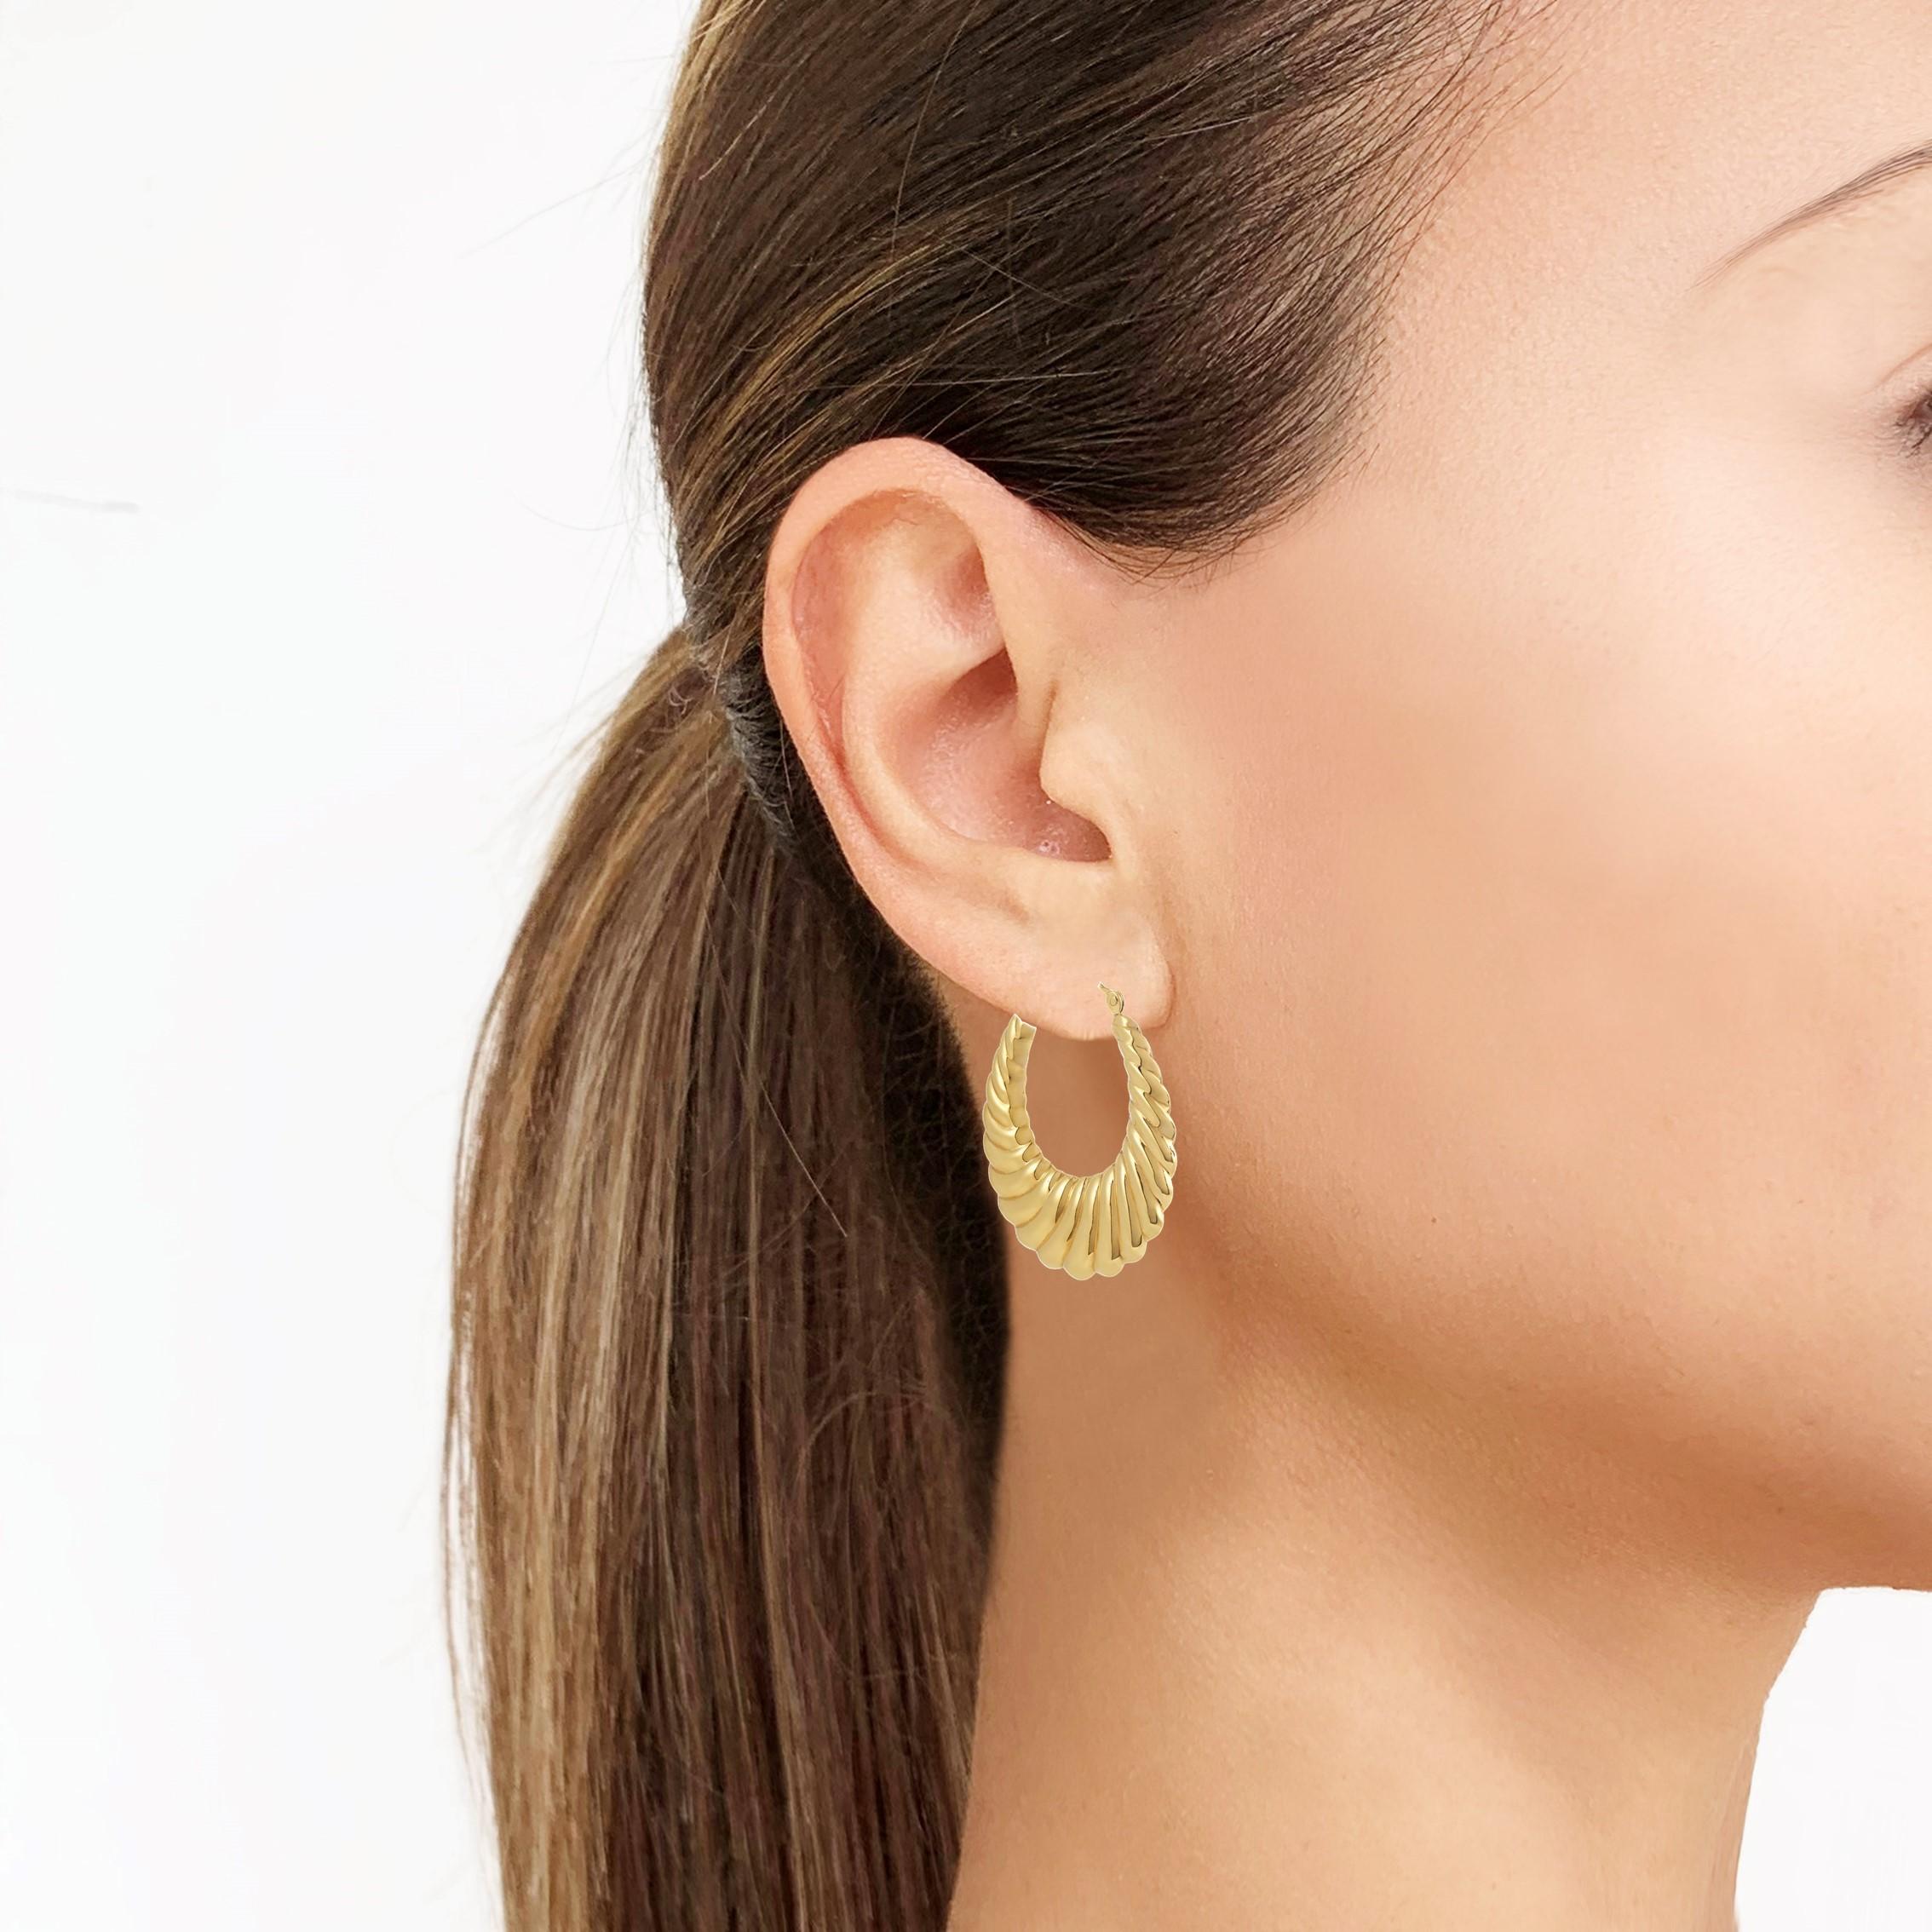 Rosior Hoop Earrings made in 19.2K Yellow Gold.
Very light so comfortable for an everyday basis.
Weight in Gold: 7.30 g.
Handmade in Portugal.
Stamped by the portuguese assay office as 19.2K Gold.
Stamped with Rosior hallmark.
Loyal to artisanal